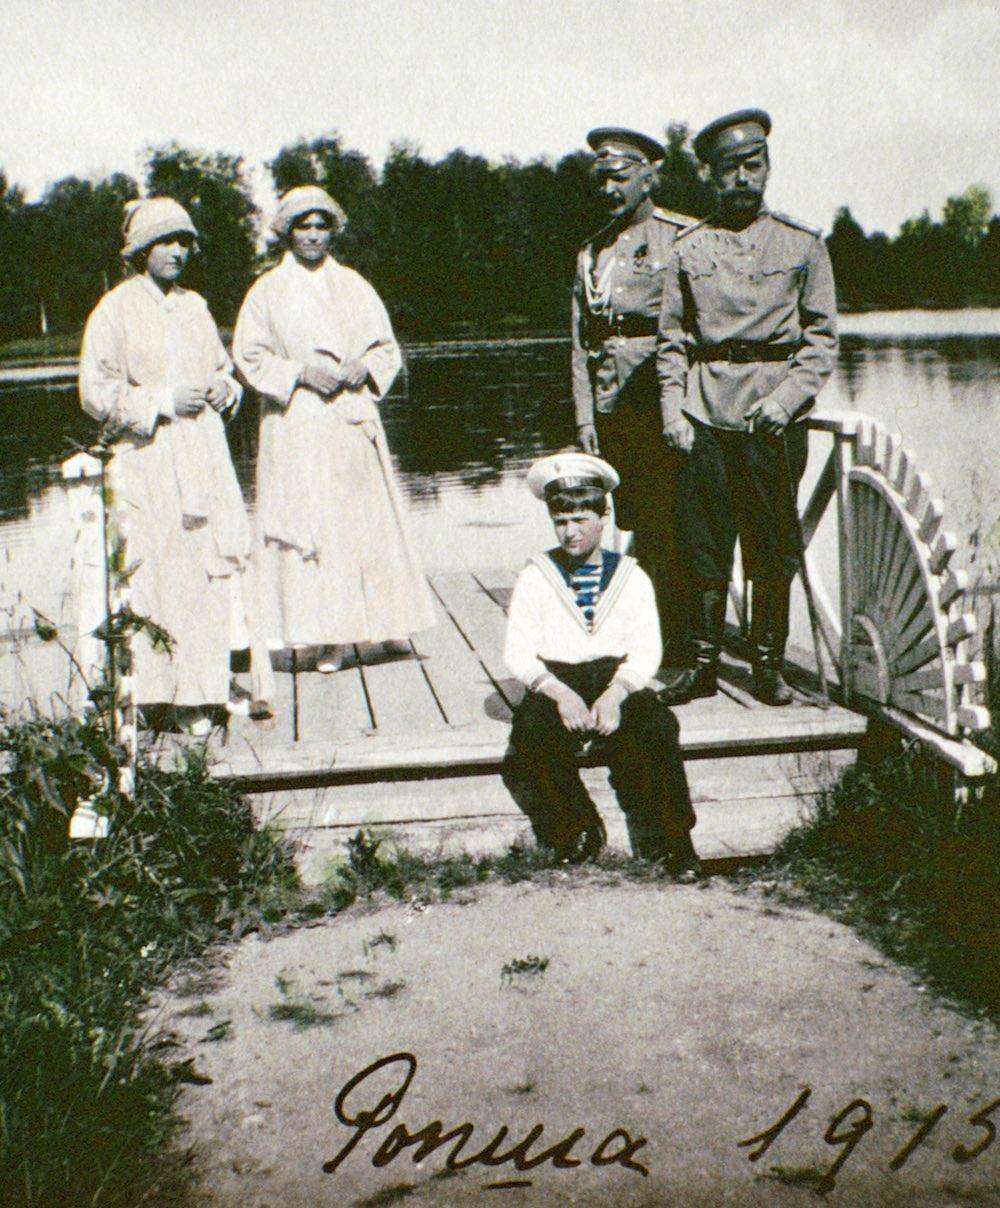 ROSPHA, RUSSIA - 1915: (L-R) Olga Romanov, Tatiana Romanov, Alexei Romanov, unidentified man and Tsar Nicholas II in 1915 in Rospha, Russia. The series of the unique pictures were taken by the Tsar Nicholas II himself or people close to the royal family. They were realized in 1915-1916, the most terrible years of World War I. Nicholas II was an insatiable photographer. He took special care of pictures, filed them with care in numerous albums. He passed down his love for photography to Maria, his third daughter, who is responsible for colouring most of the pictures. (Photo: Laski Diffusion/Getty Images)